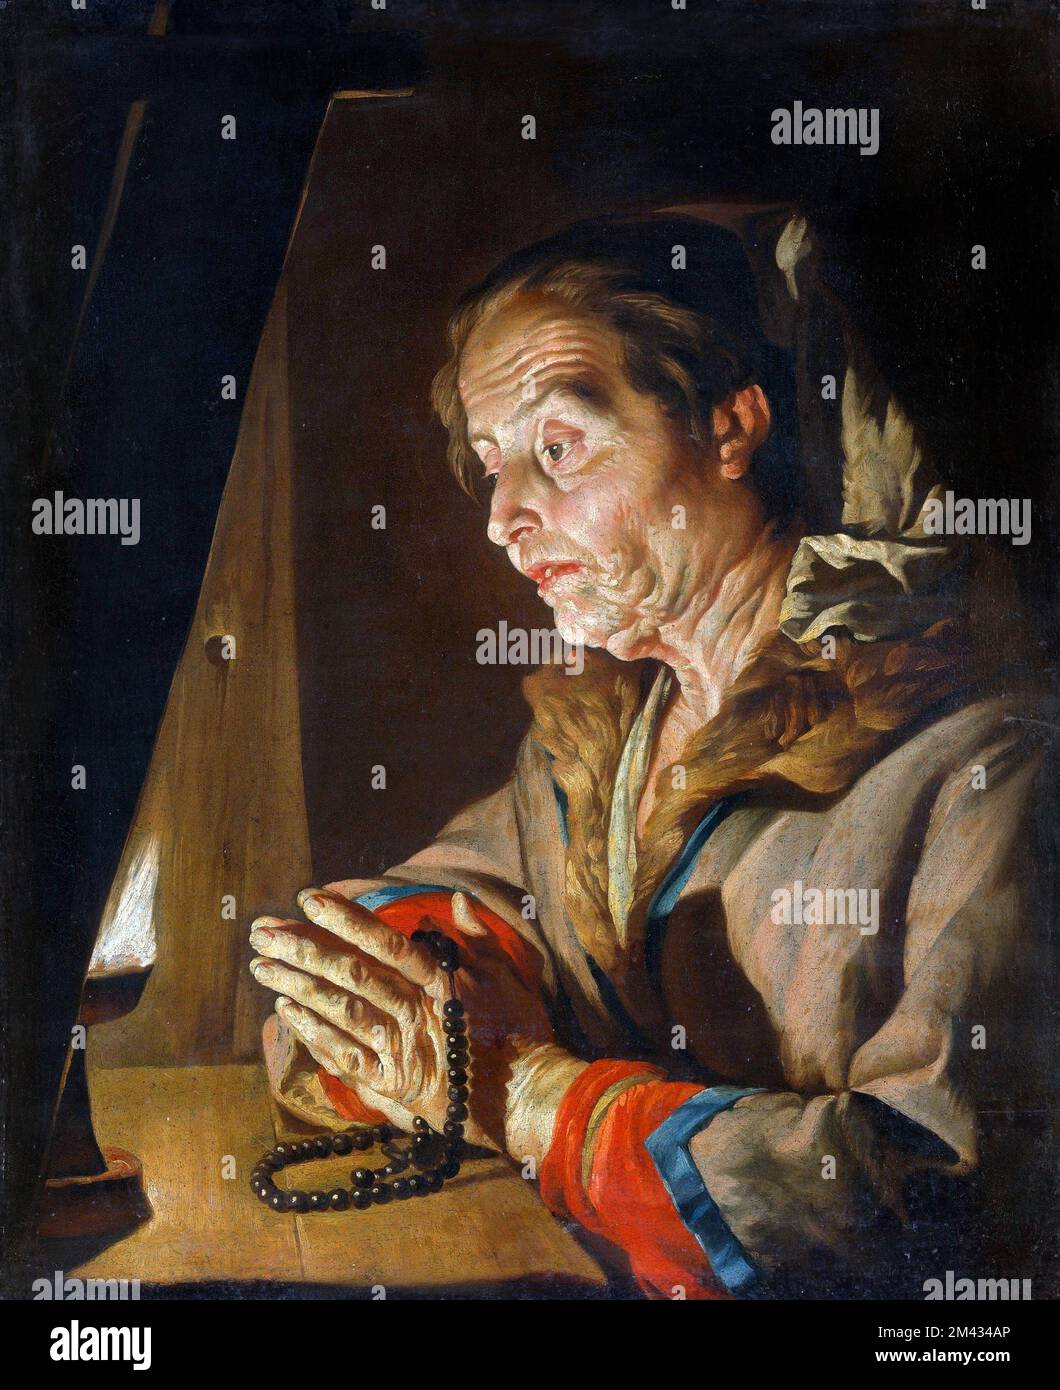 Old Woman Praying by Matthias Stom (c. 1600-c. 1652), oil on canvas, late 1630s- early 1640s Stock Photo